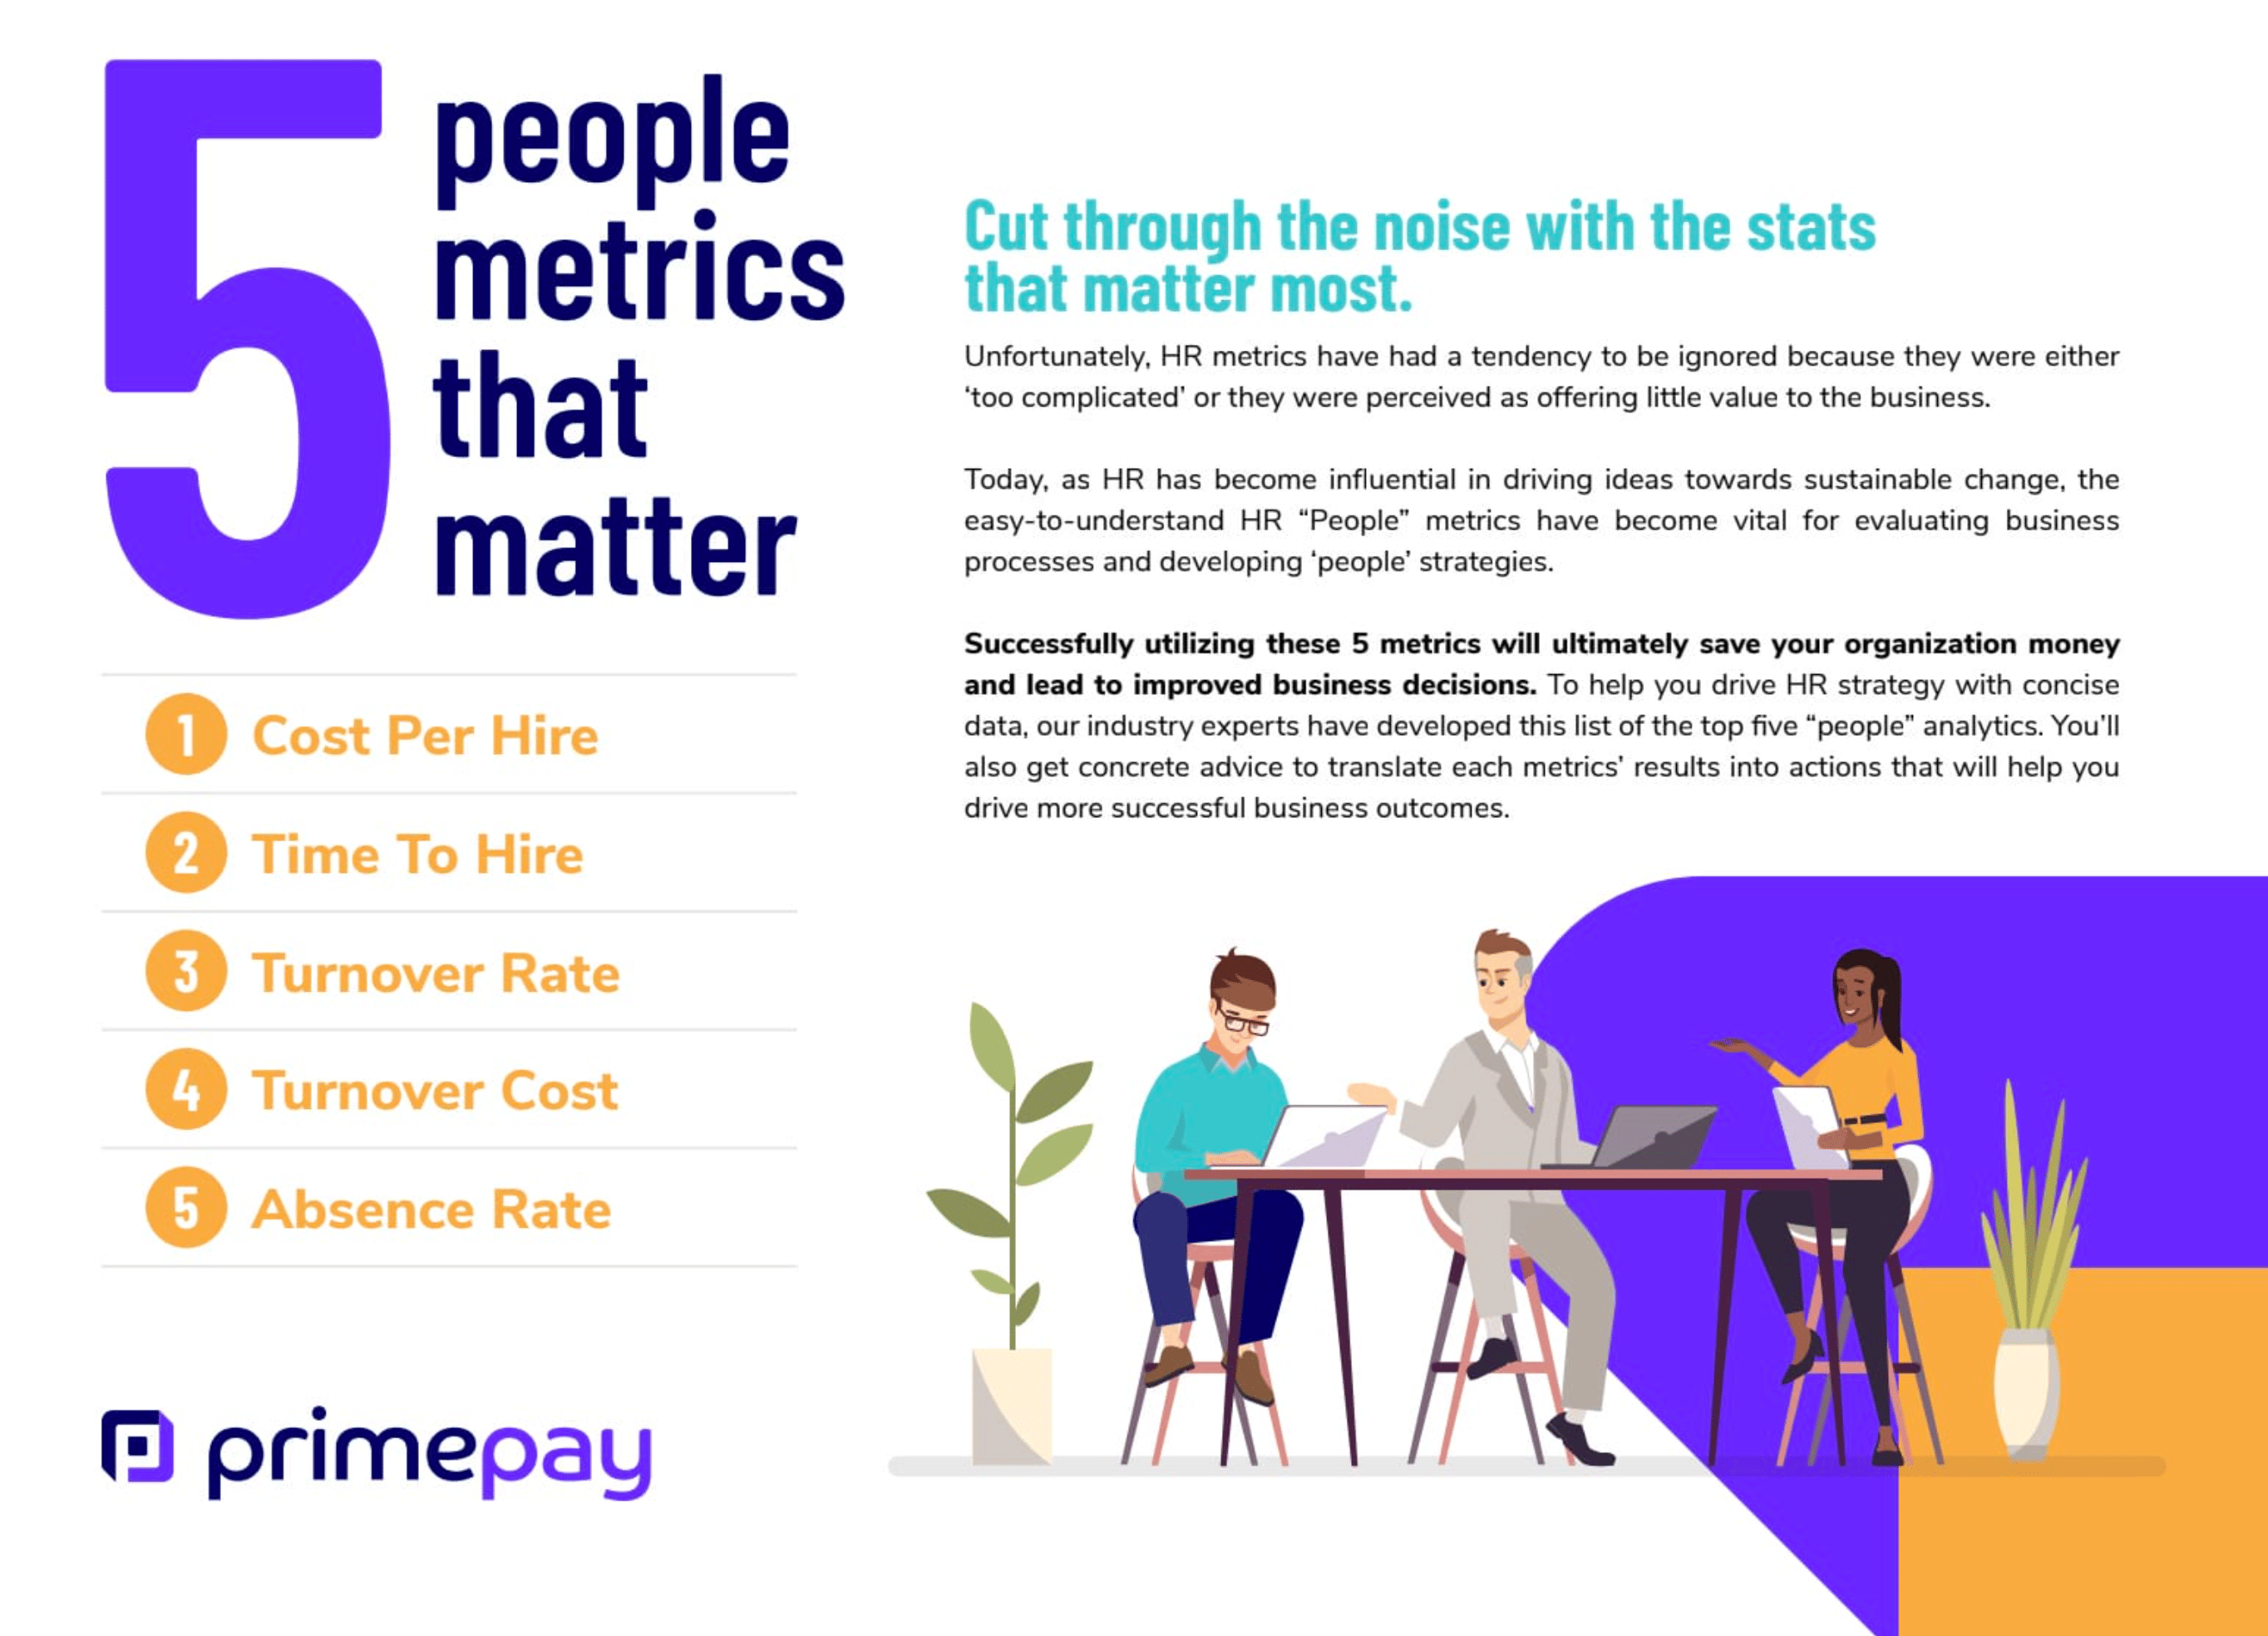 5 People Metrics that Matter white paper cover image.